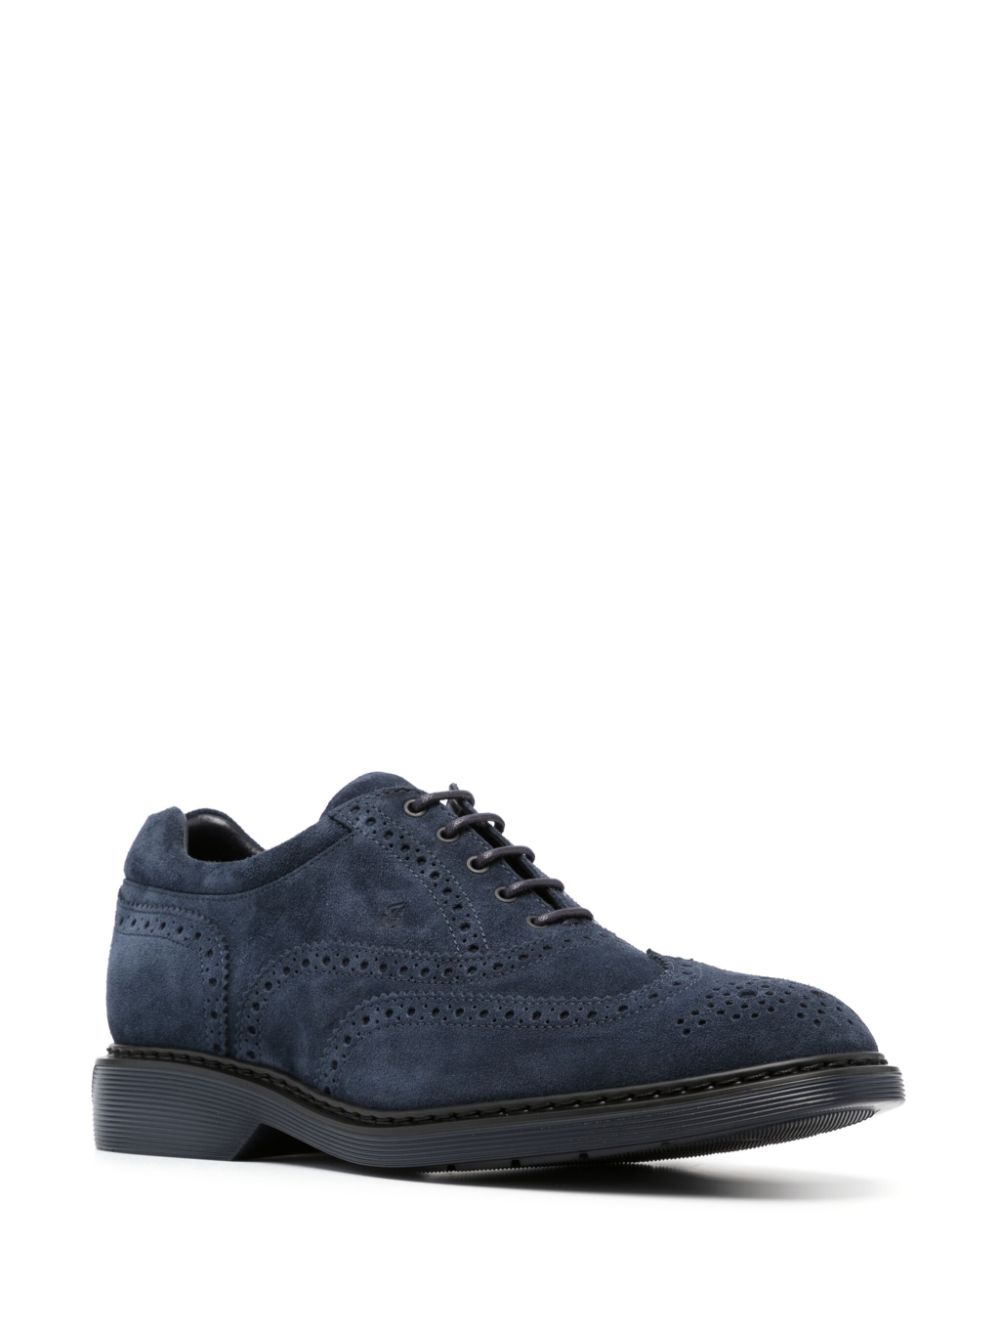 Hogan suede lace-up loafers - Blauw